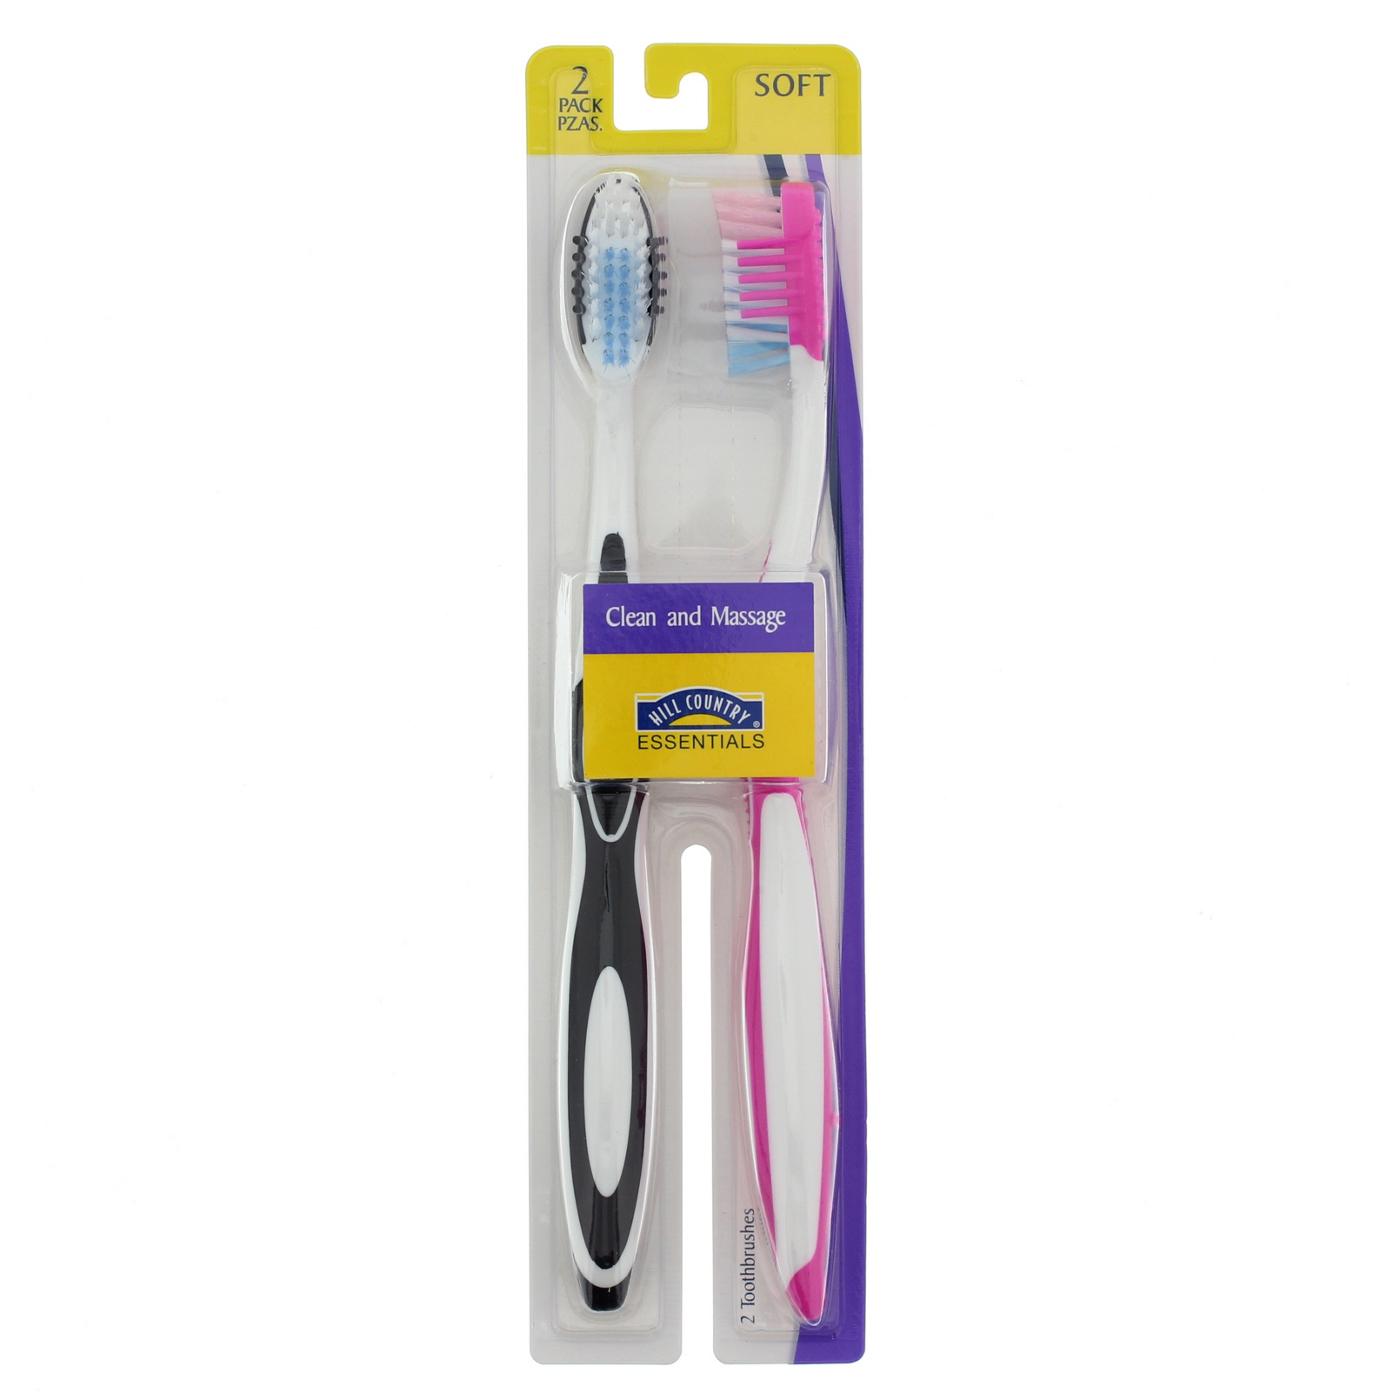 Hill Country Essentials Clean and Massage Soft Toothbrushes - Colors May Vary; image 1 of 2